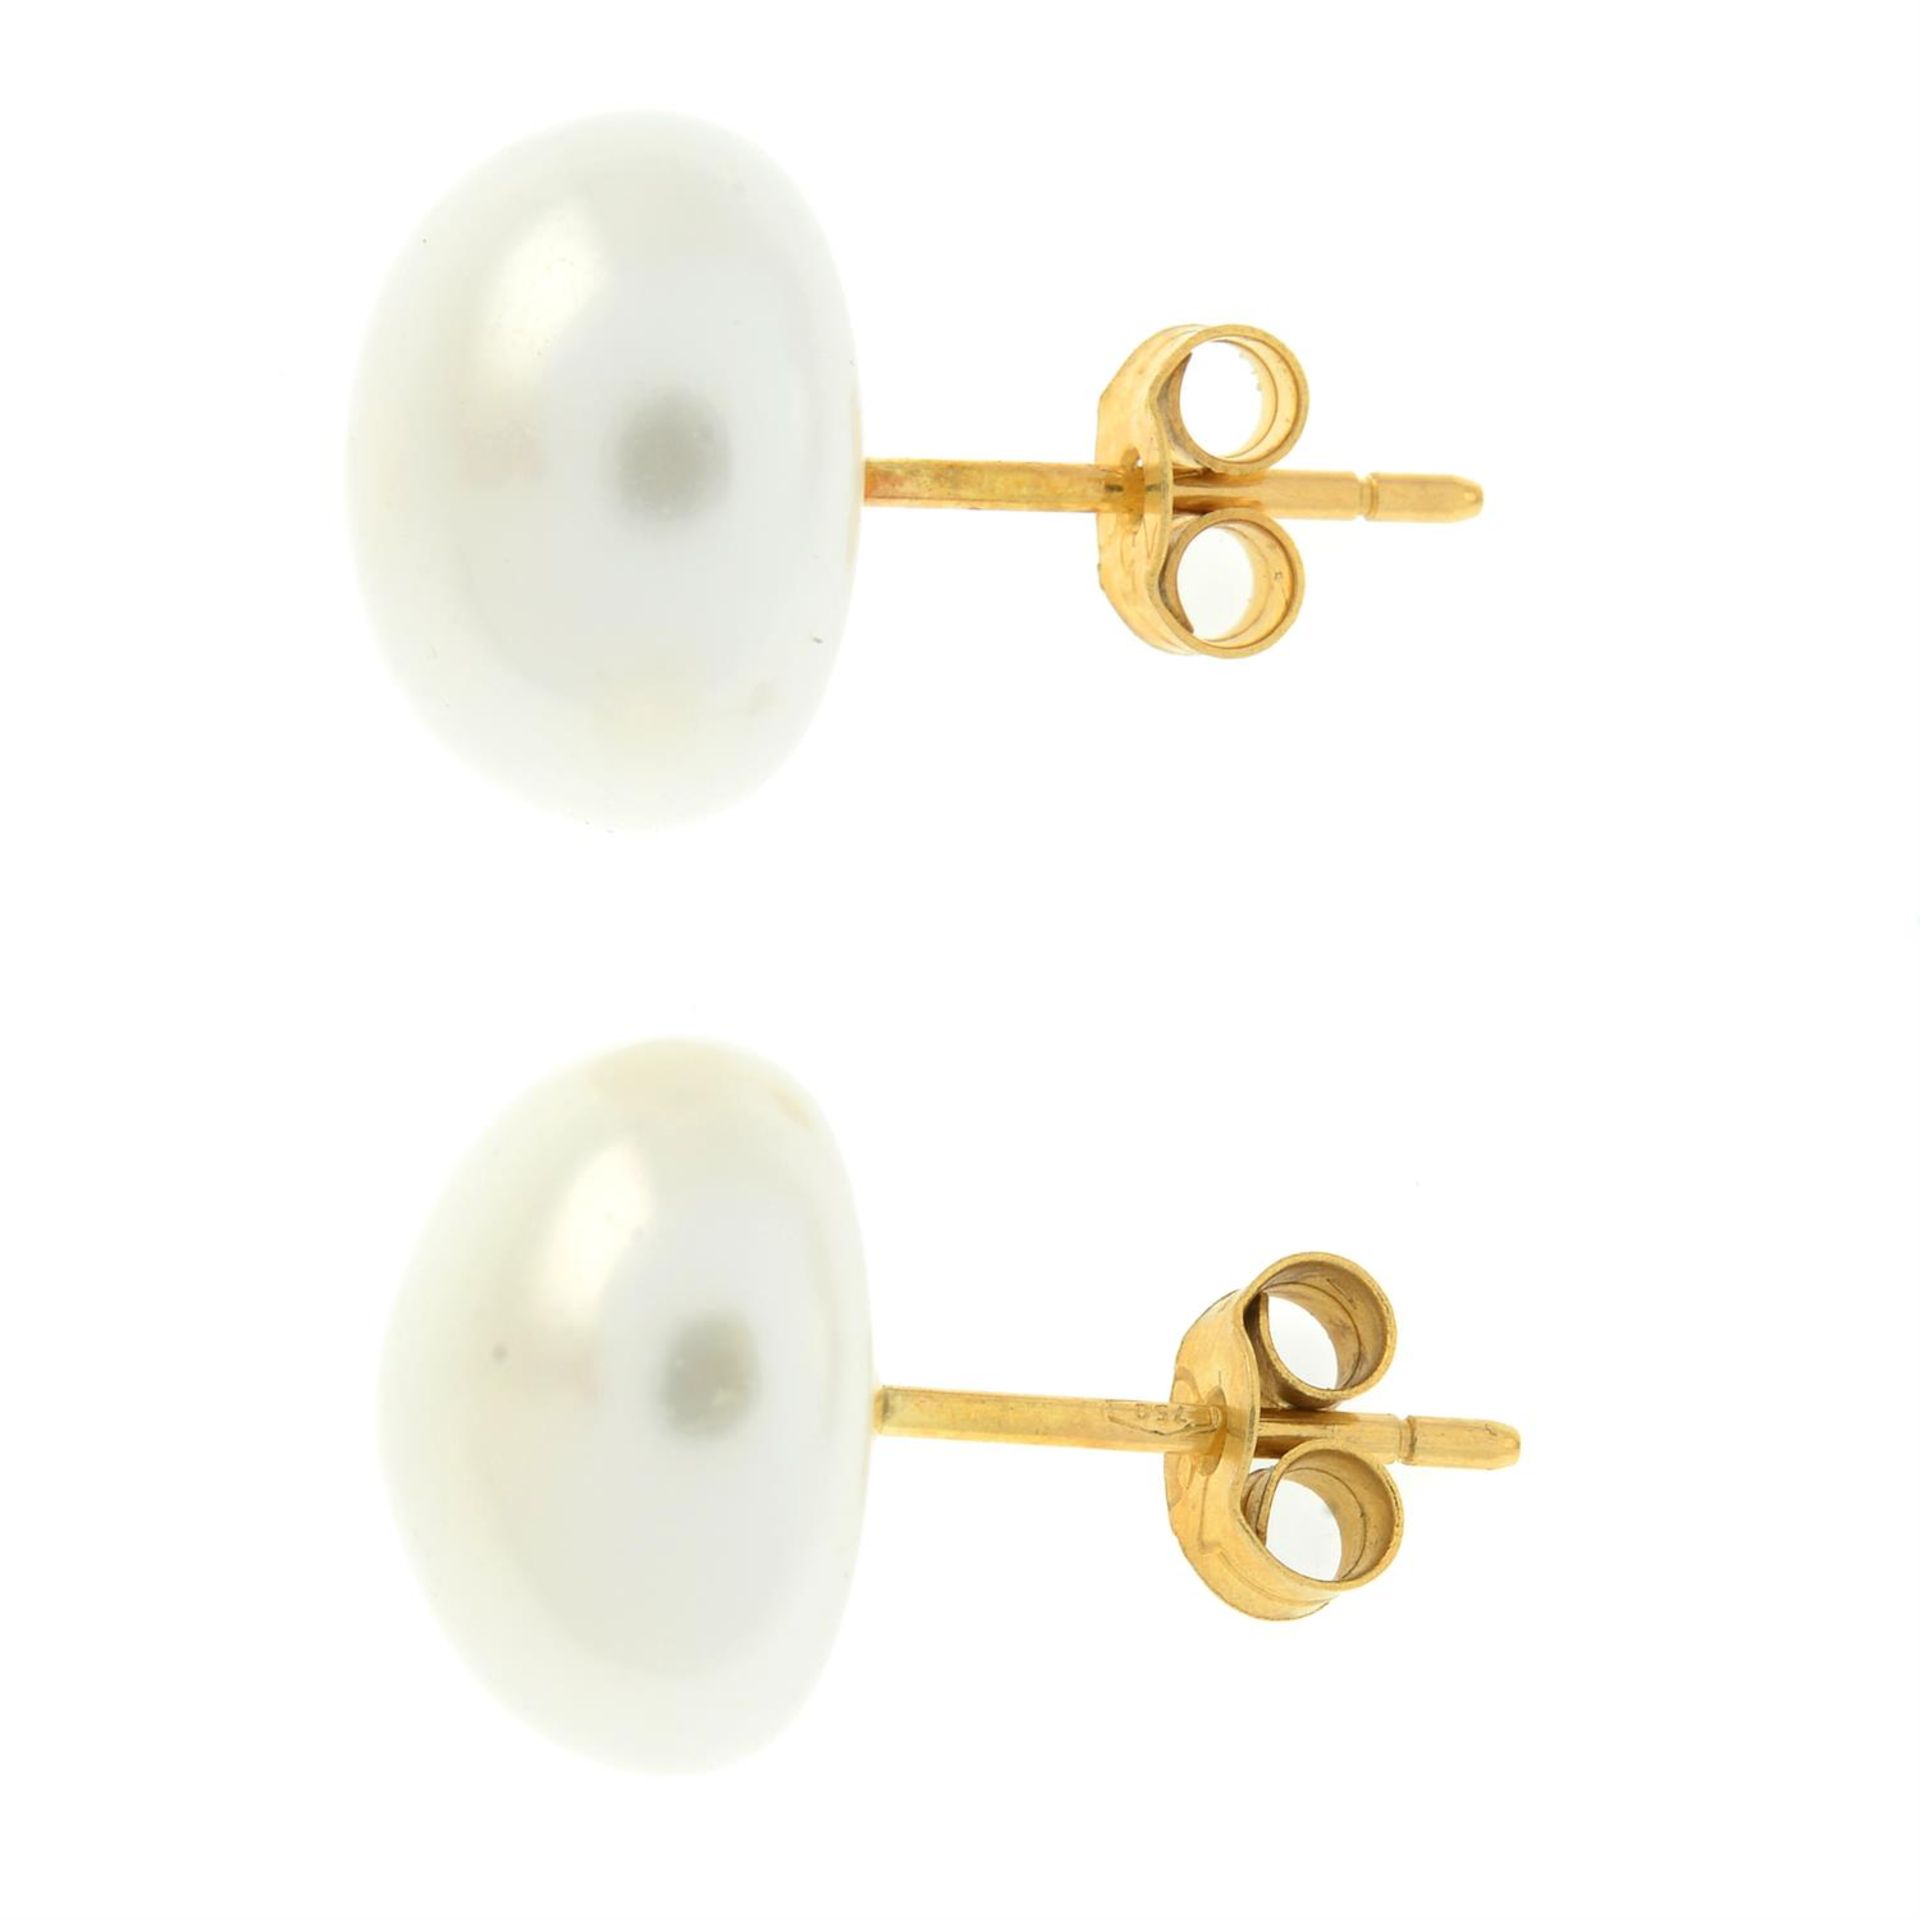 A pair of cultured mebe pearl stud earrings. - Image 2 of 2